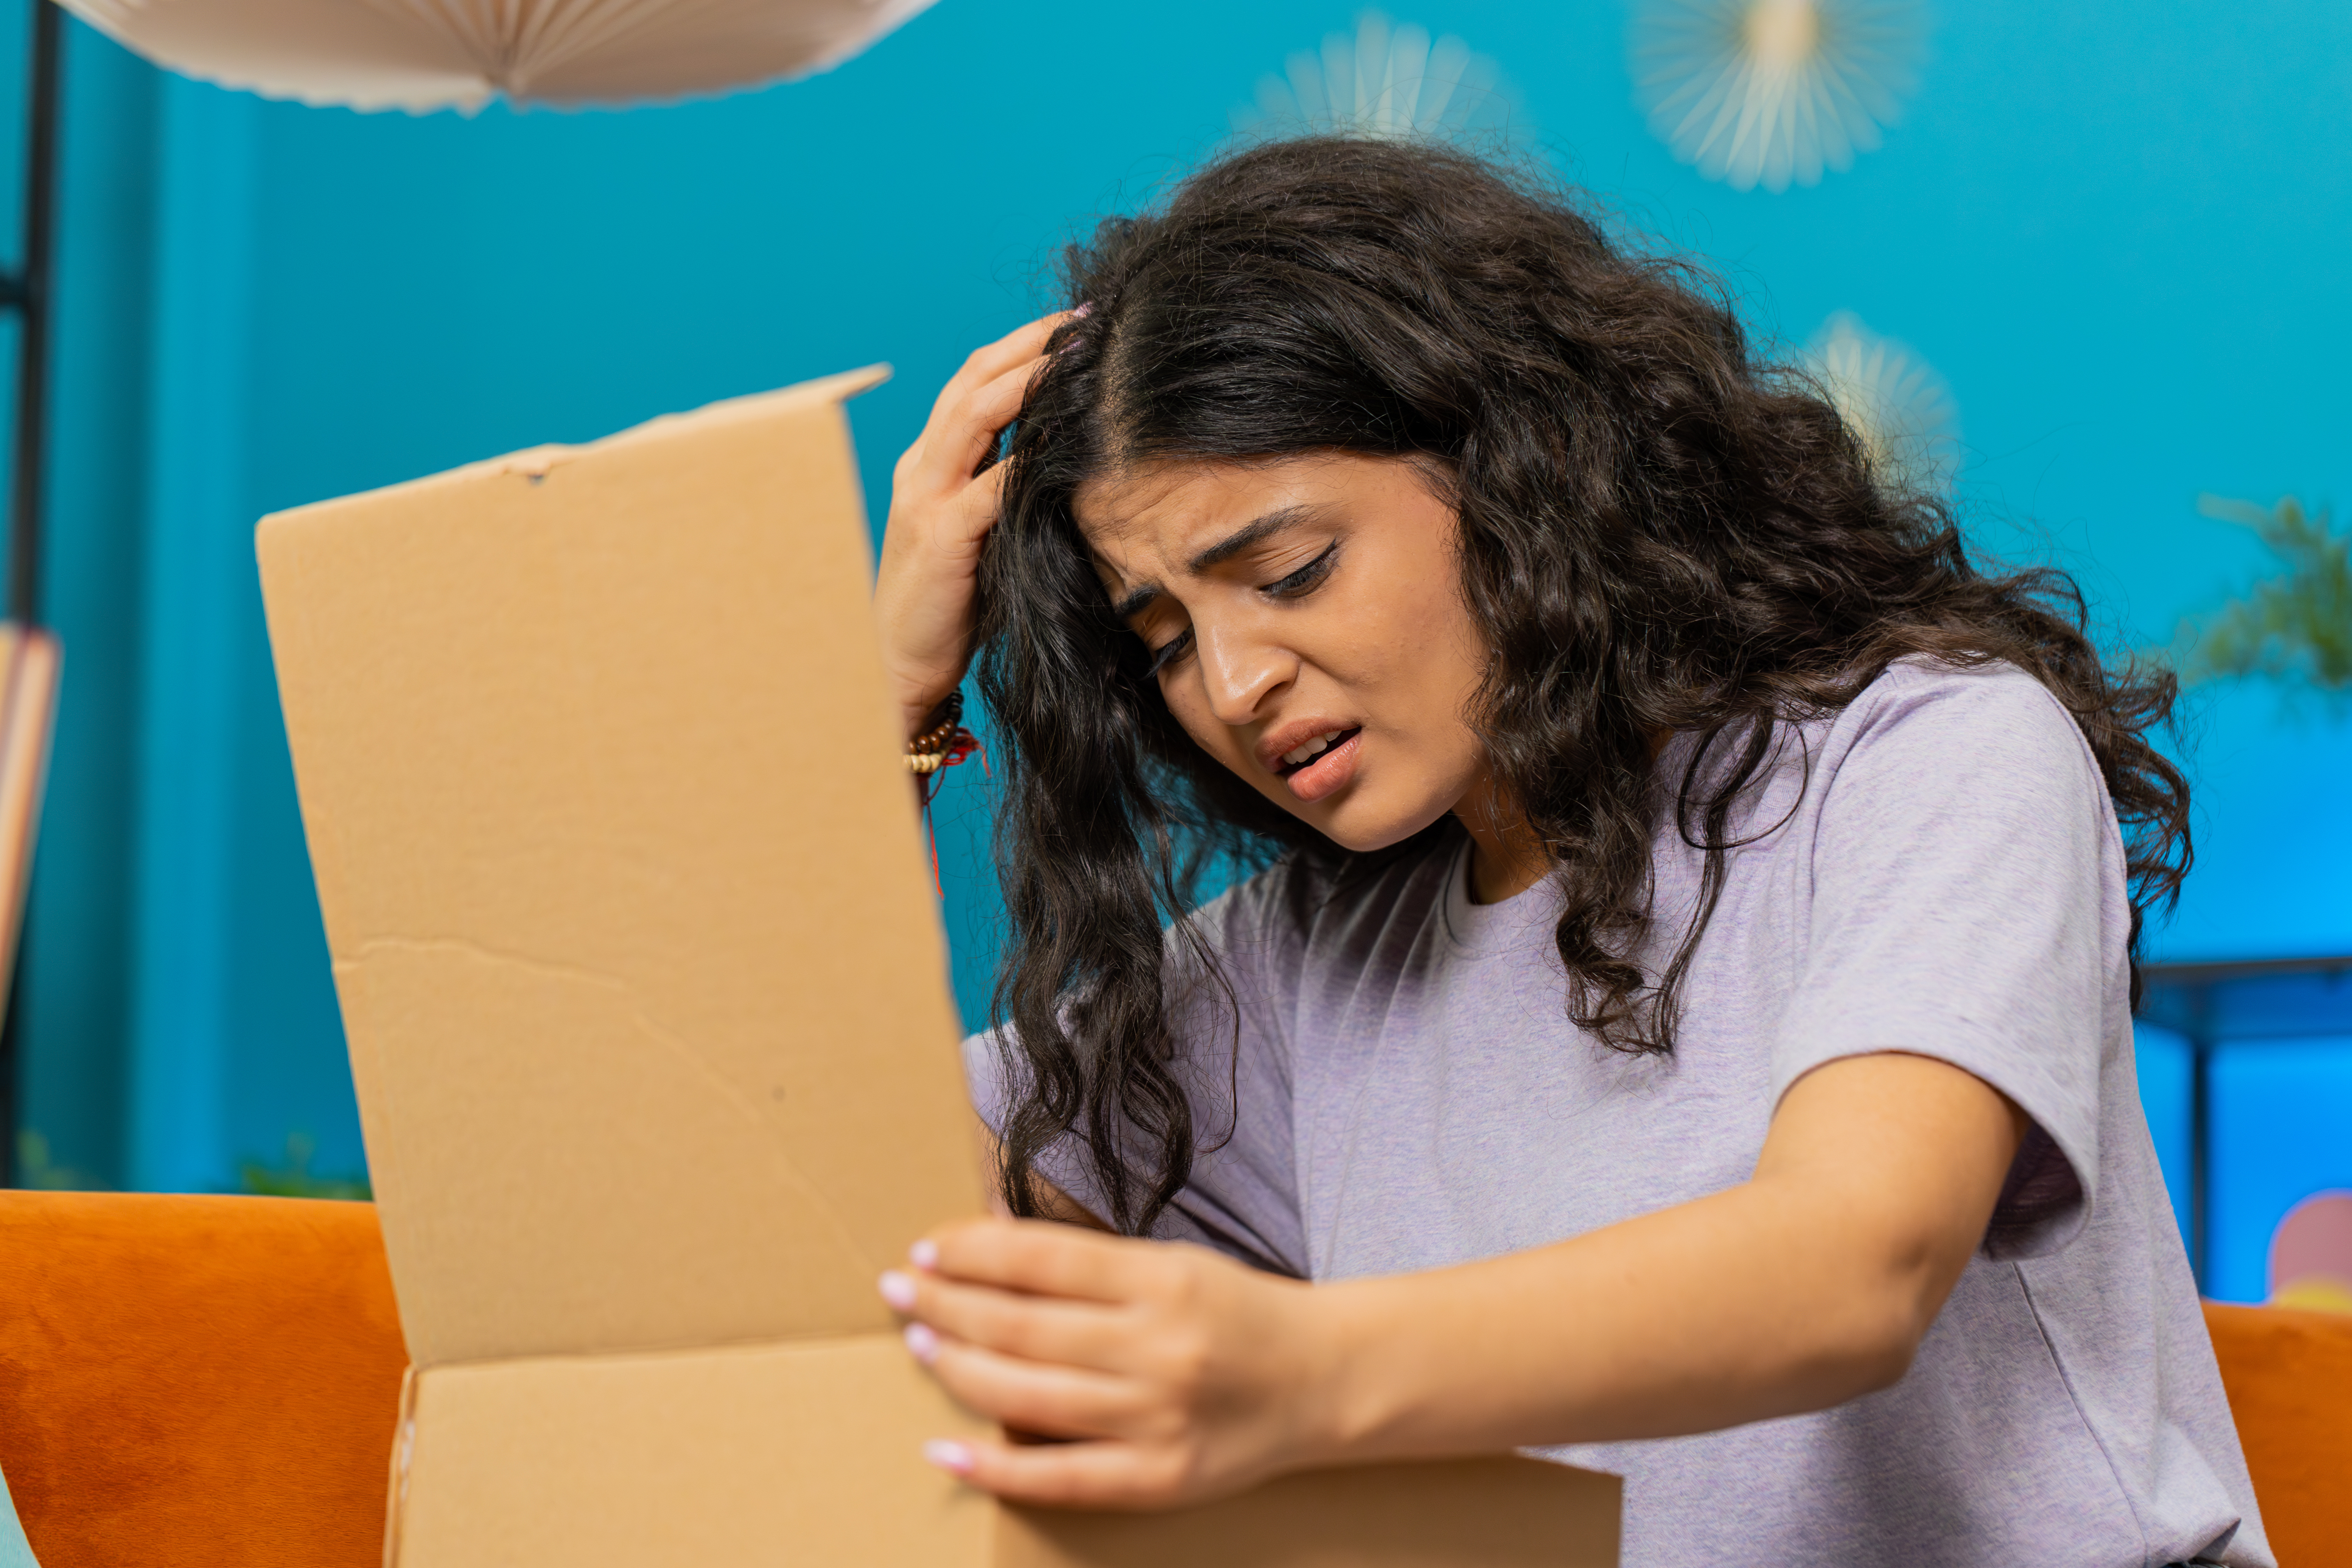 An upset woman looking at something in a box | Source: Getty Images